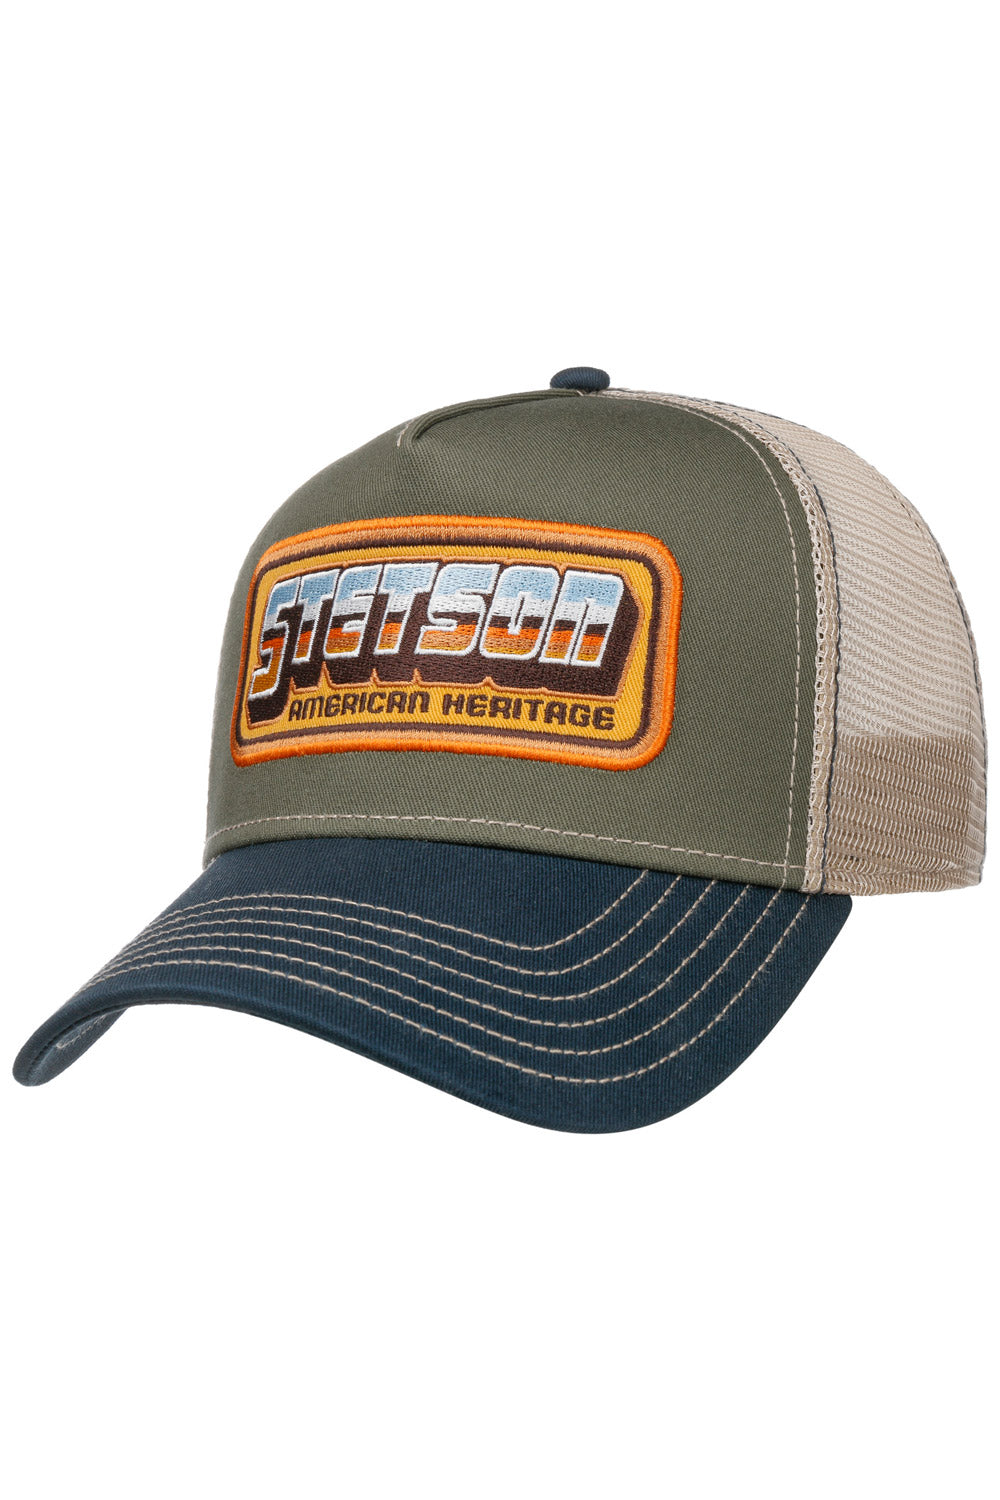 Buy the Stetson American Heritage Patch Trucker Cap in Green at Intro. Spend £50 for free UK delivery. Official stockists. We ship worldwide.